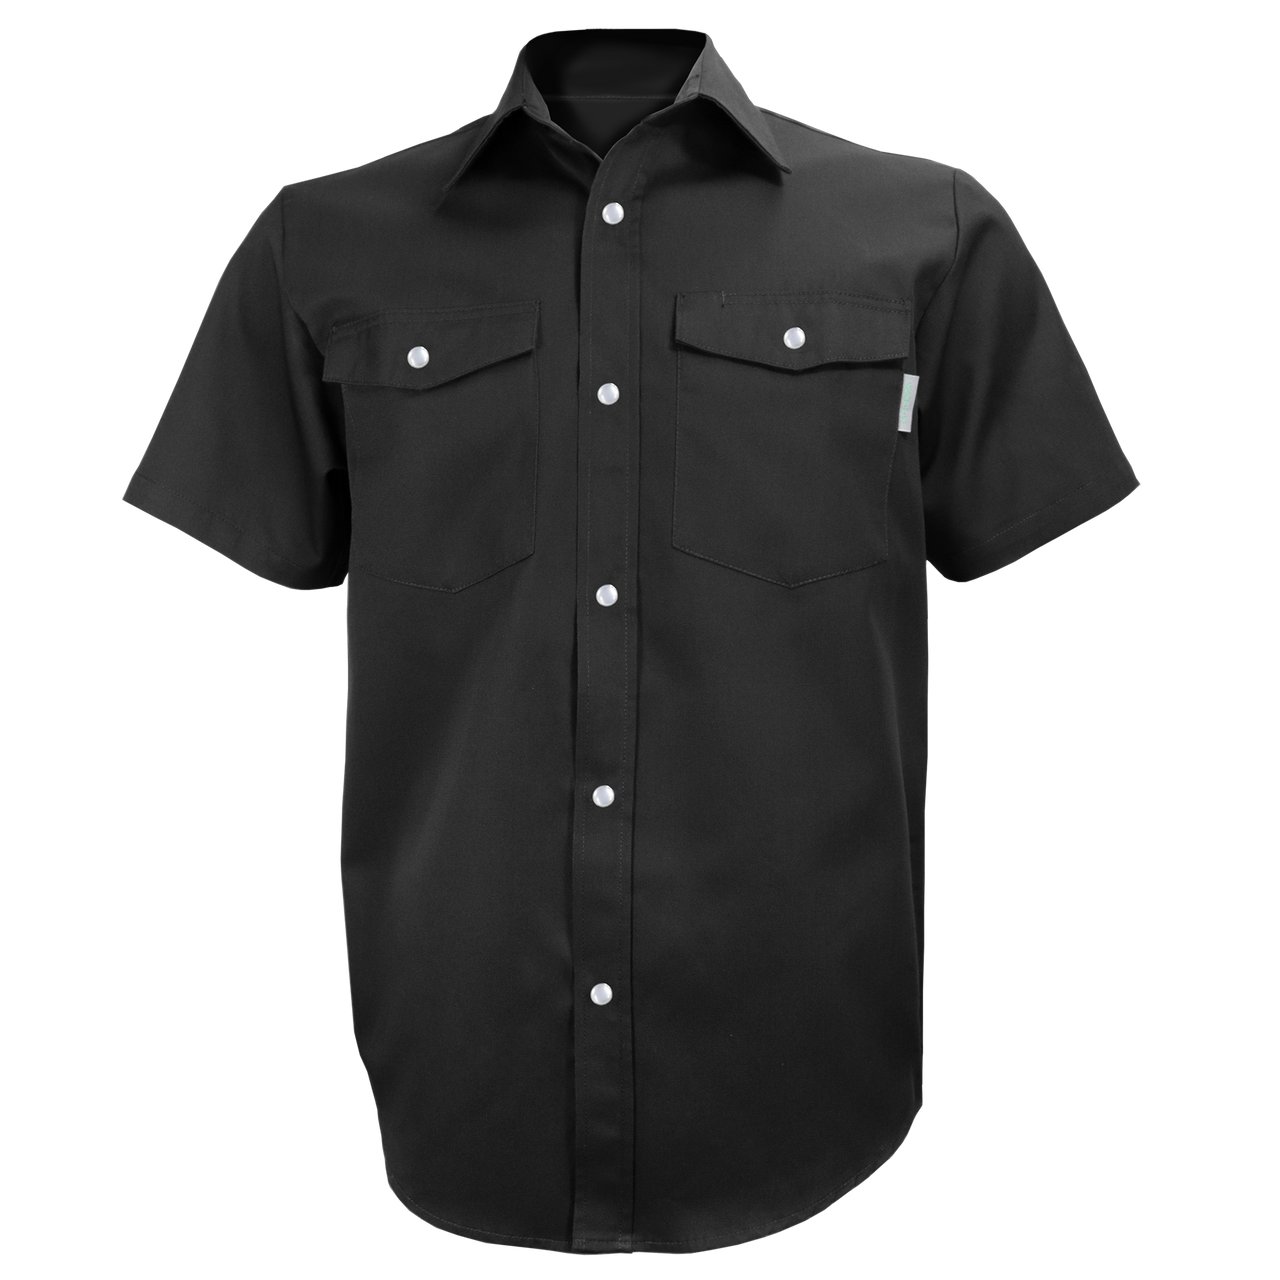 650S - Chemise à manches courtes (boutons pressions)||650S - Short sleeves shirt (snaps)